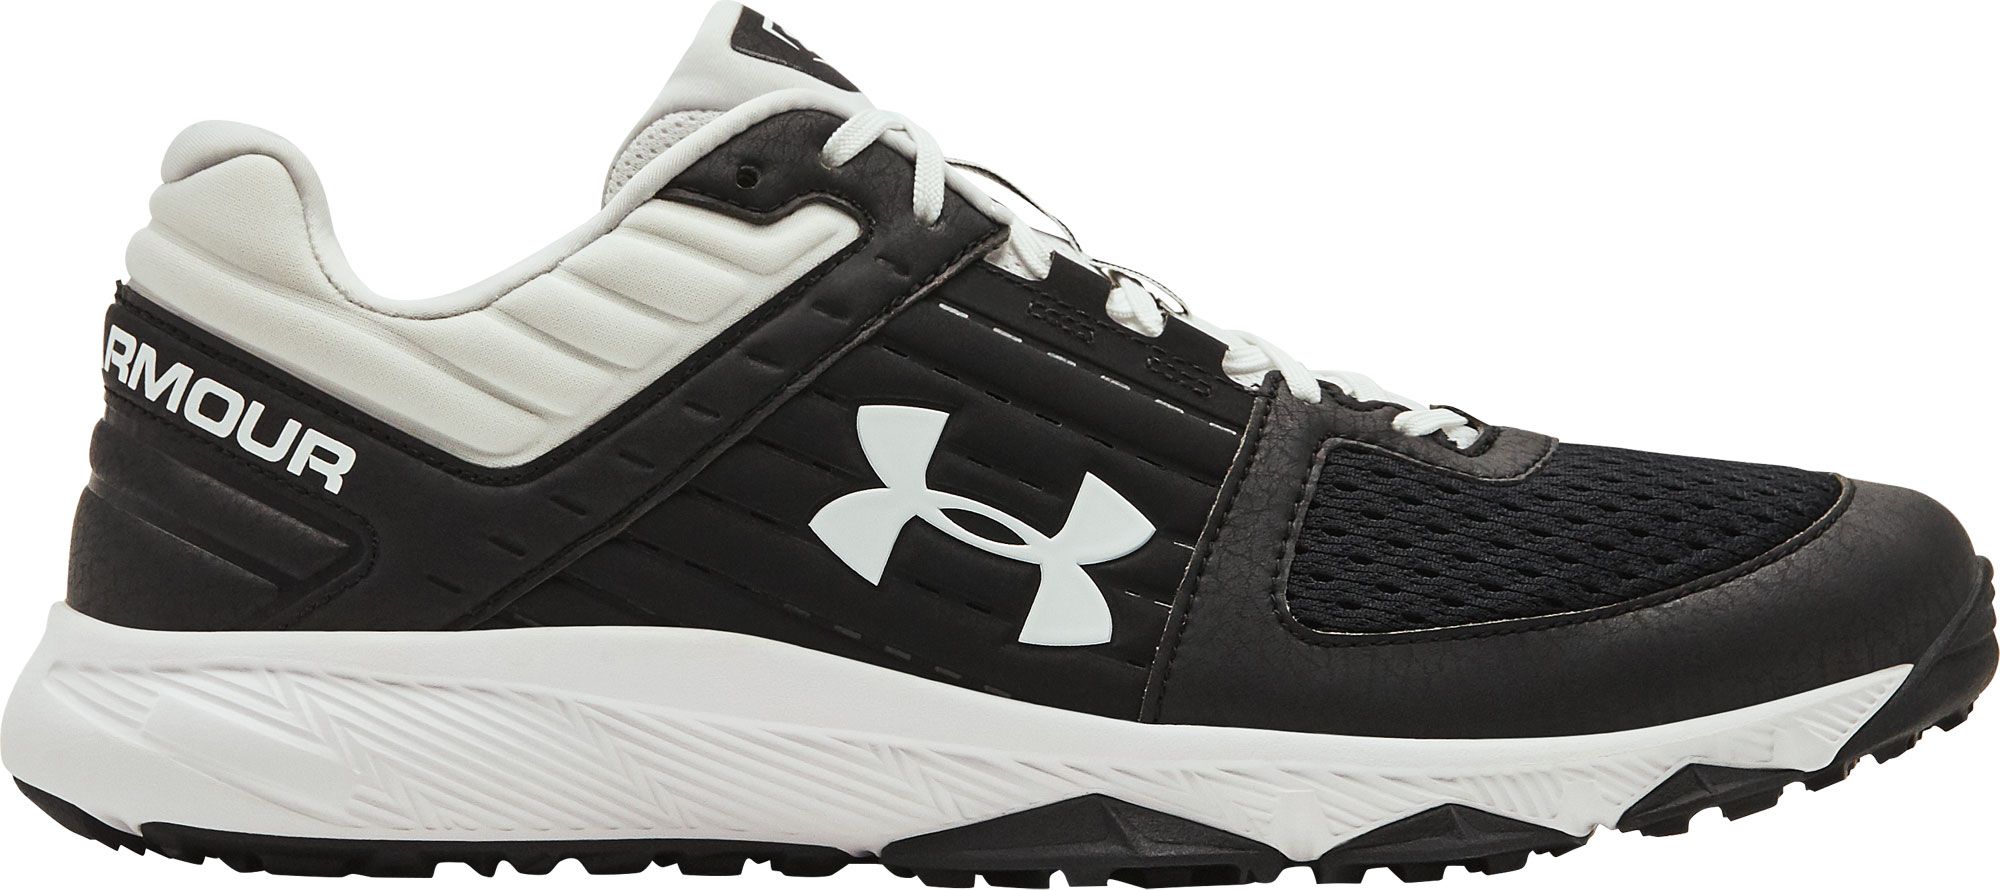 under armour soccer turf shoes